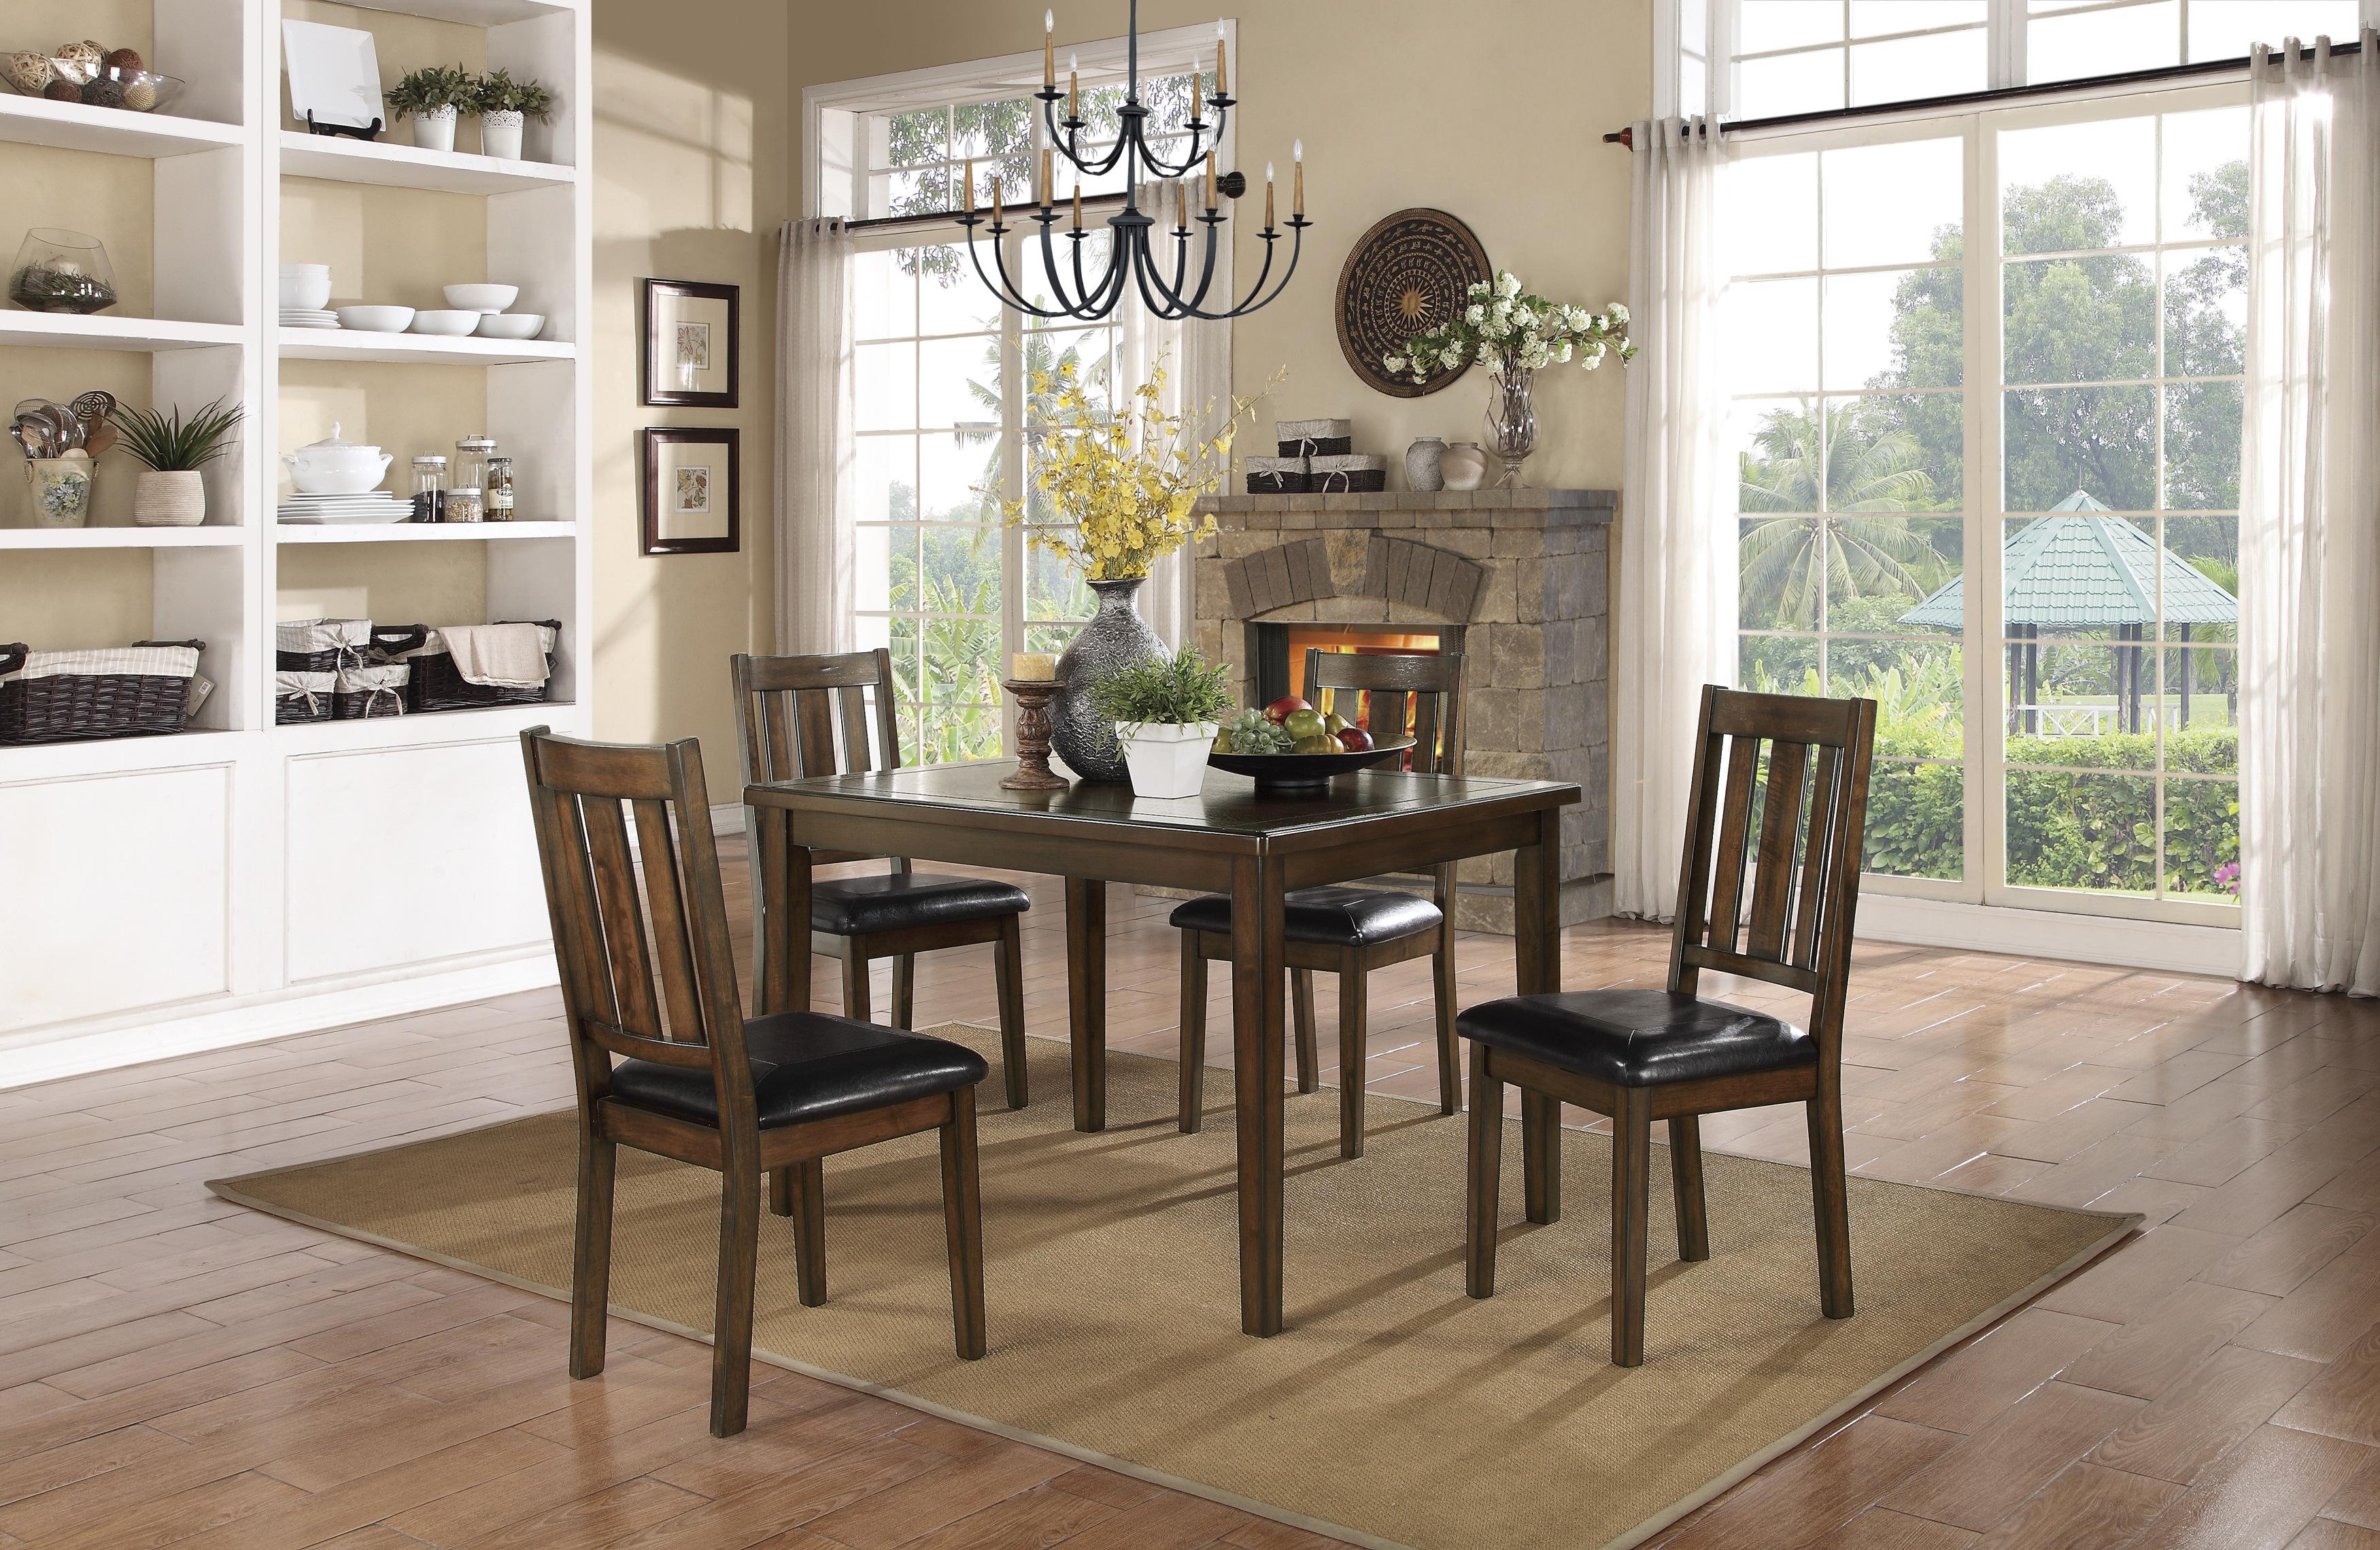 

    
5103 Transitional Dark Brown Cherry Wood Dining Room Set 5pcs Homelegance 5103 Mosely
